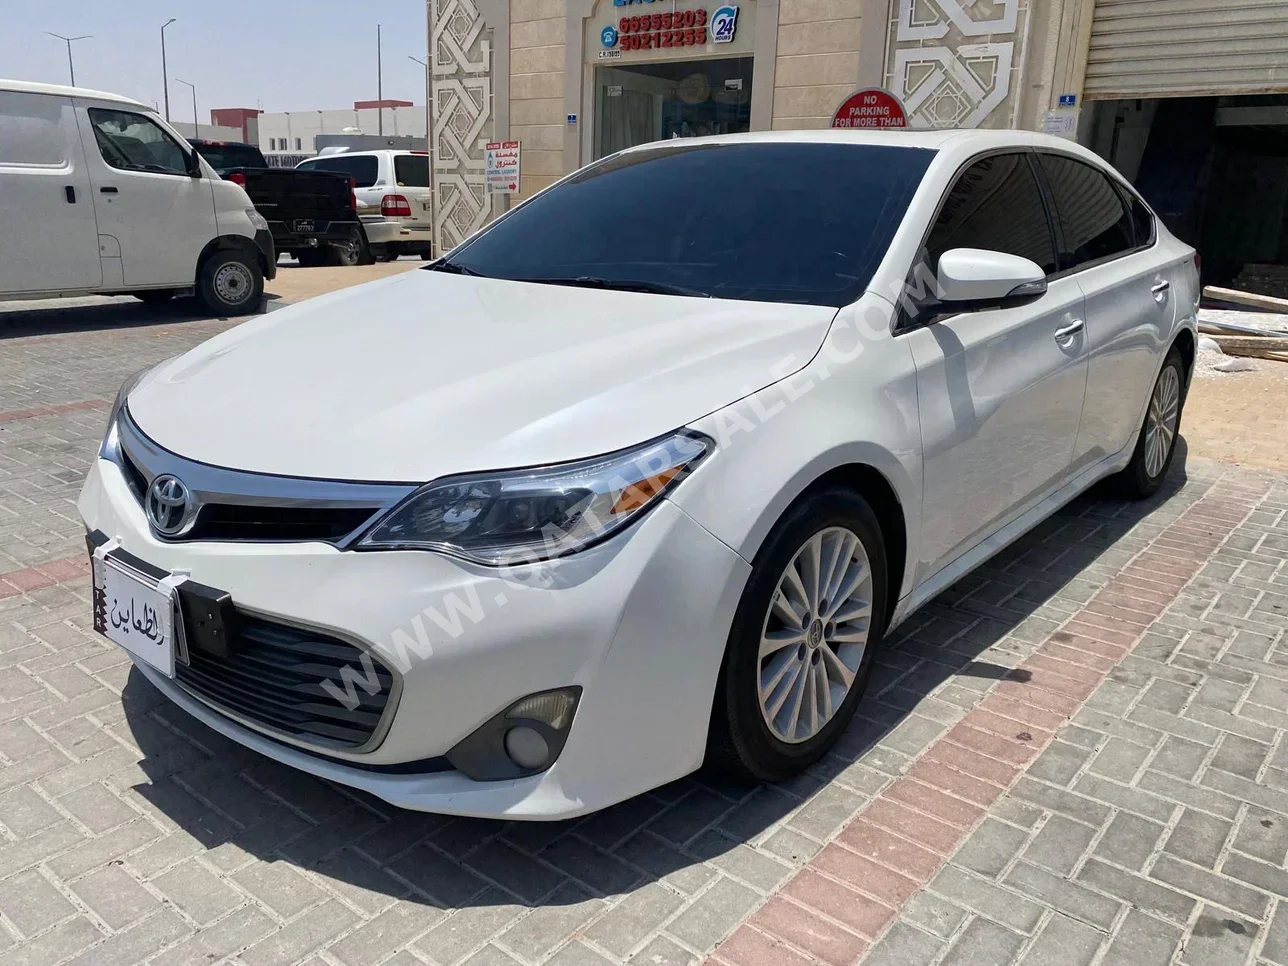 Toyota  Avalon  Limited  2013  Automatic  221,000 Km  6 Cylinder  Front Wheel Drive (FWD)  Sedan  White